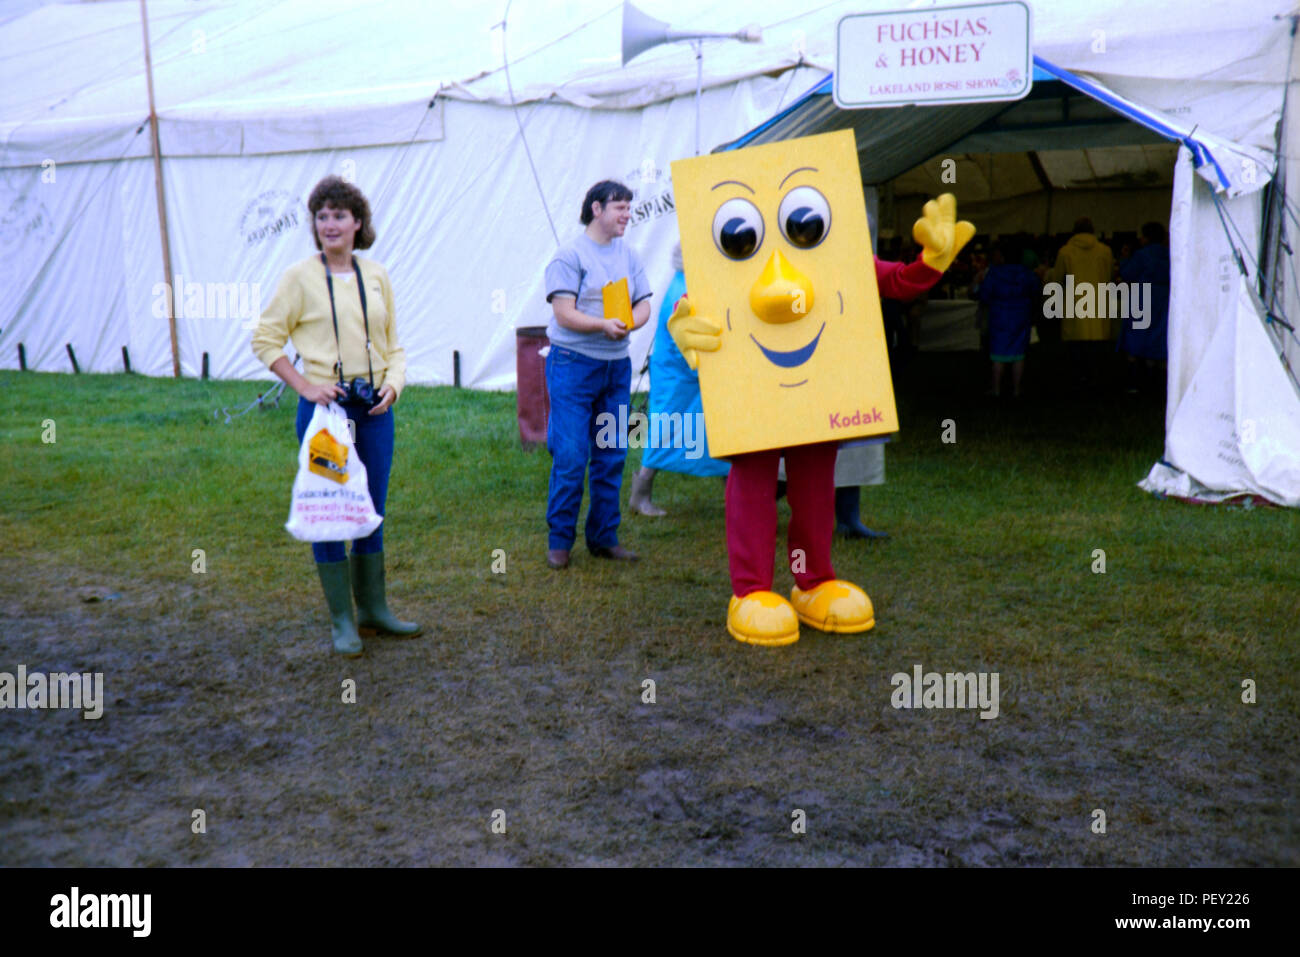 A rainy day at the Lakeland Rose Show, Cumbria with a Kodak mascot. Original image taken from a colour negative in 1985 Stock Photo